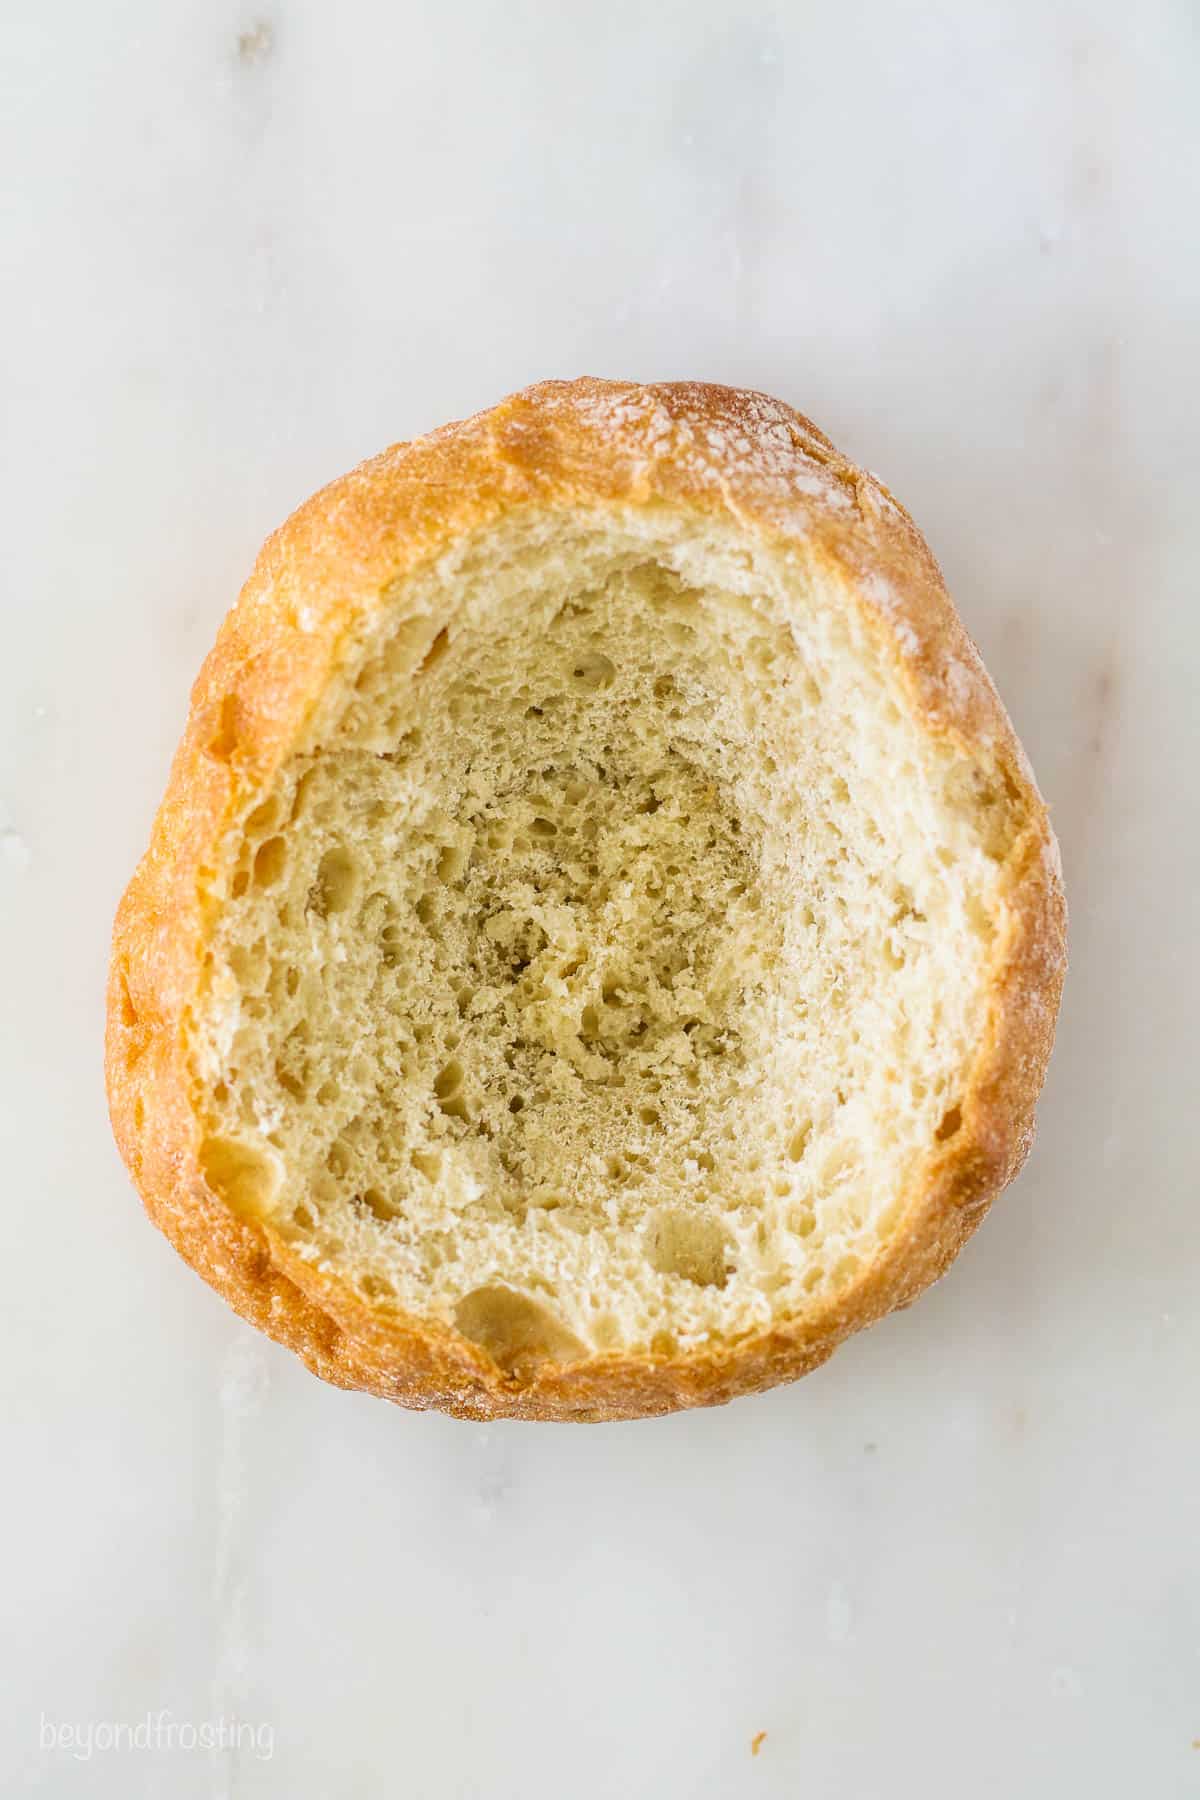 Overhead view of a bread bowl